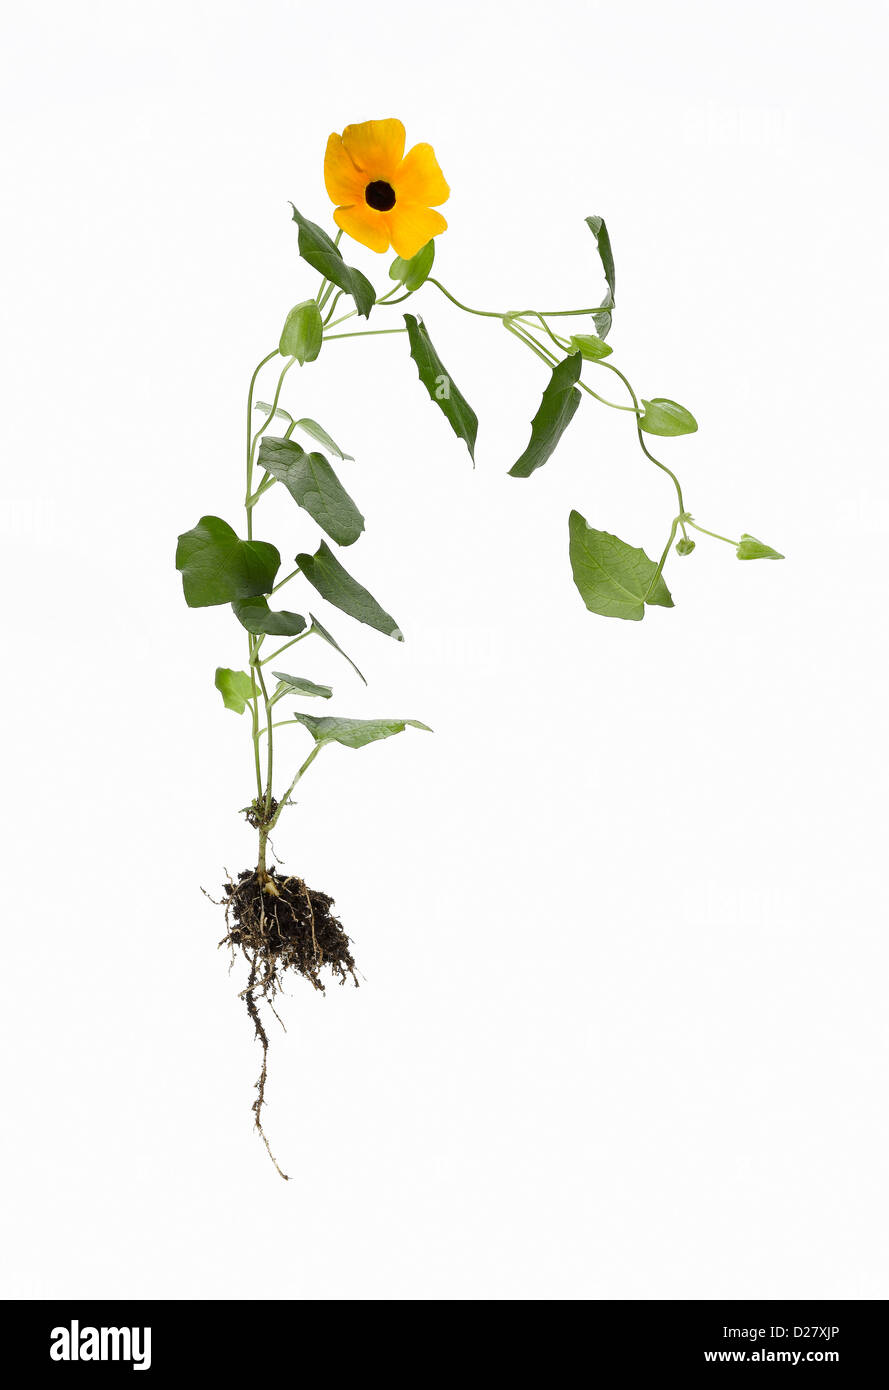 Thunbergia Plant with Single Yellow Flower and Roots in Soil on White Background Stock Photo